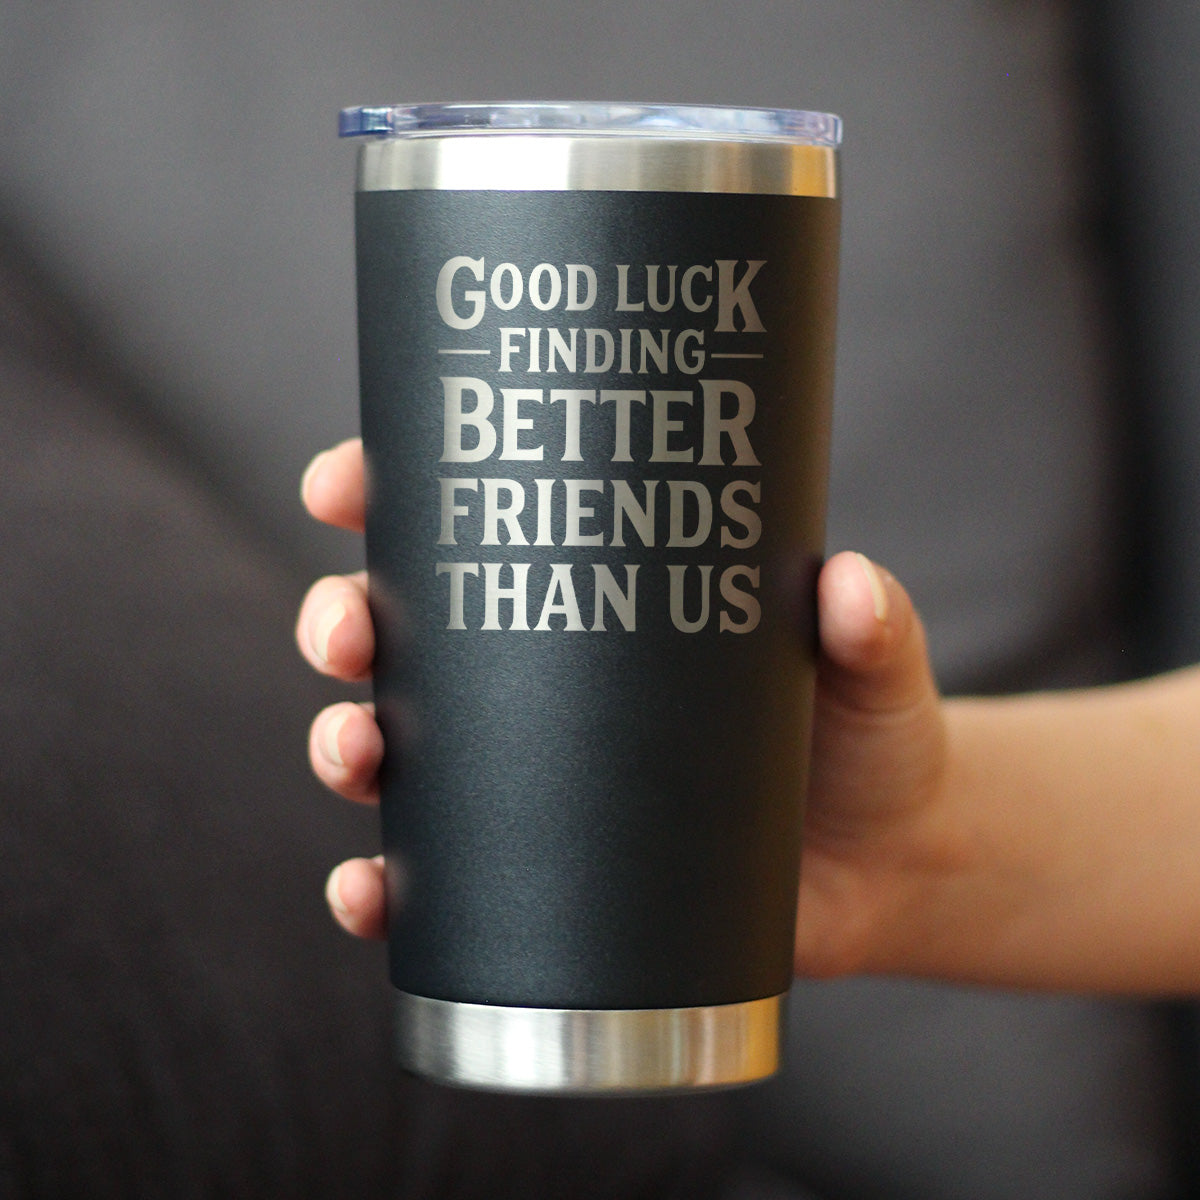 Good Luck Finding Better Friends Than Us - Insulated Coffee Tumbler Cup with Sliding Lid - Stainless Steel Insulated Mug - Funny Farewell Gift For Best Friend Moving Away